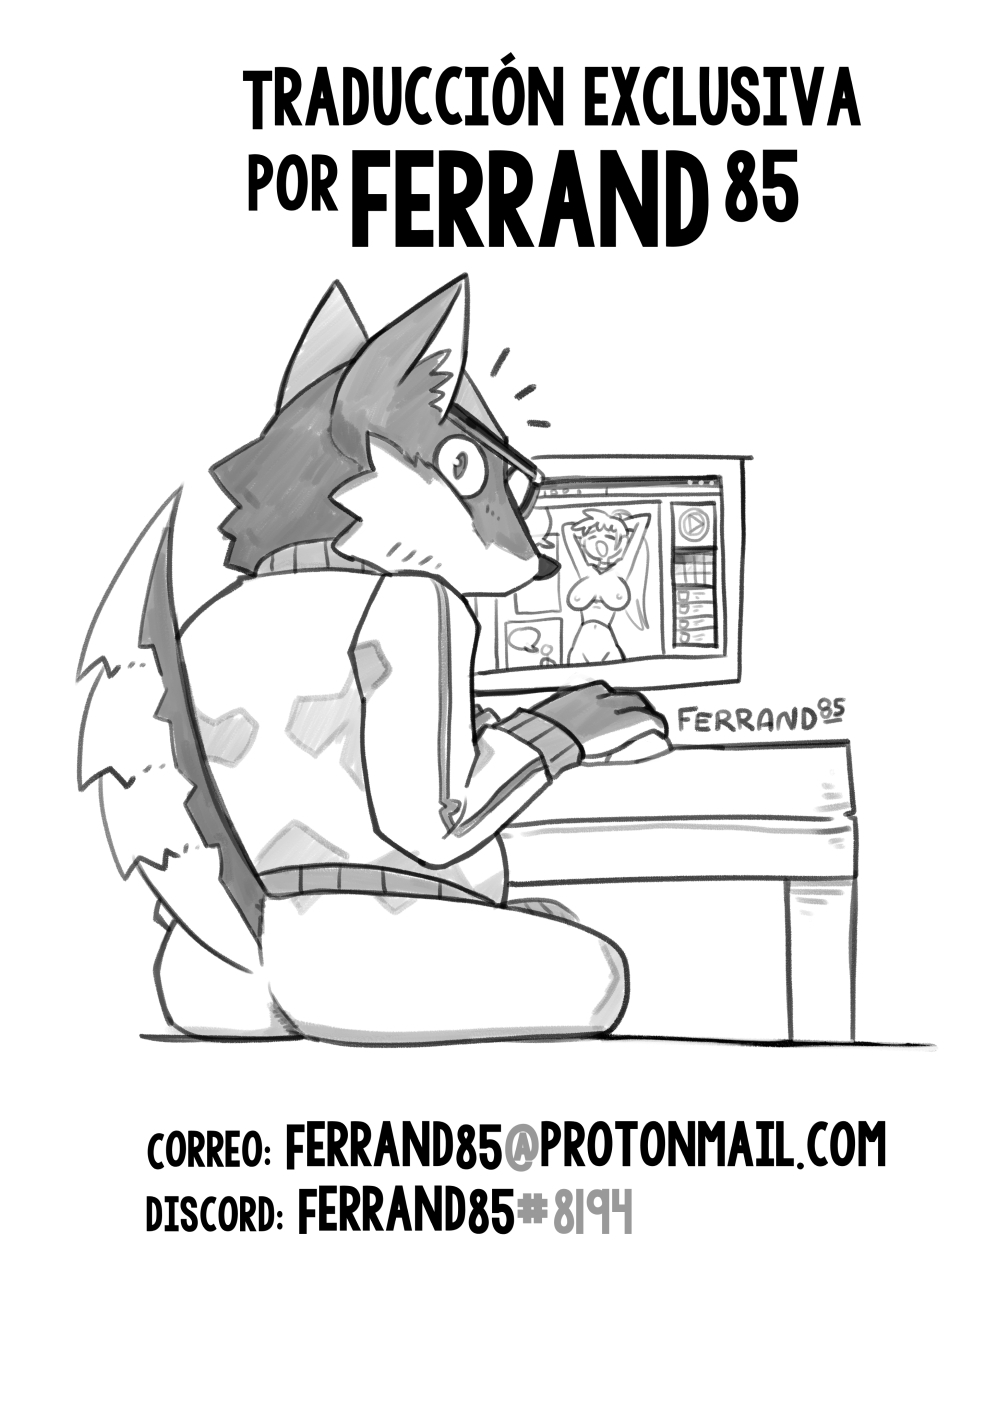 [João Pereira] - The Tale of the Morning Routine - [Spanish] - [Ferrand85] - Complete 8